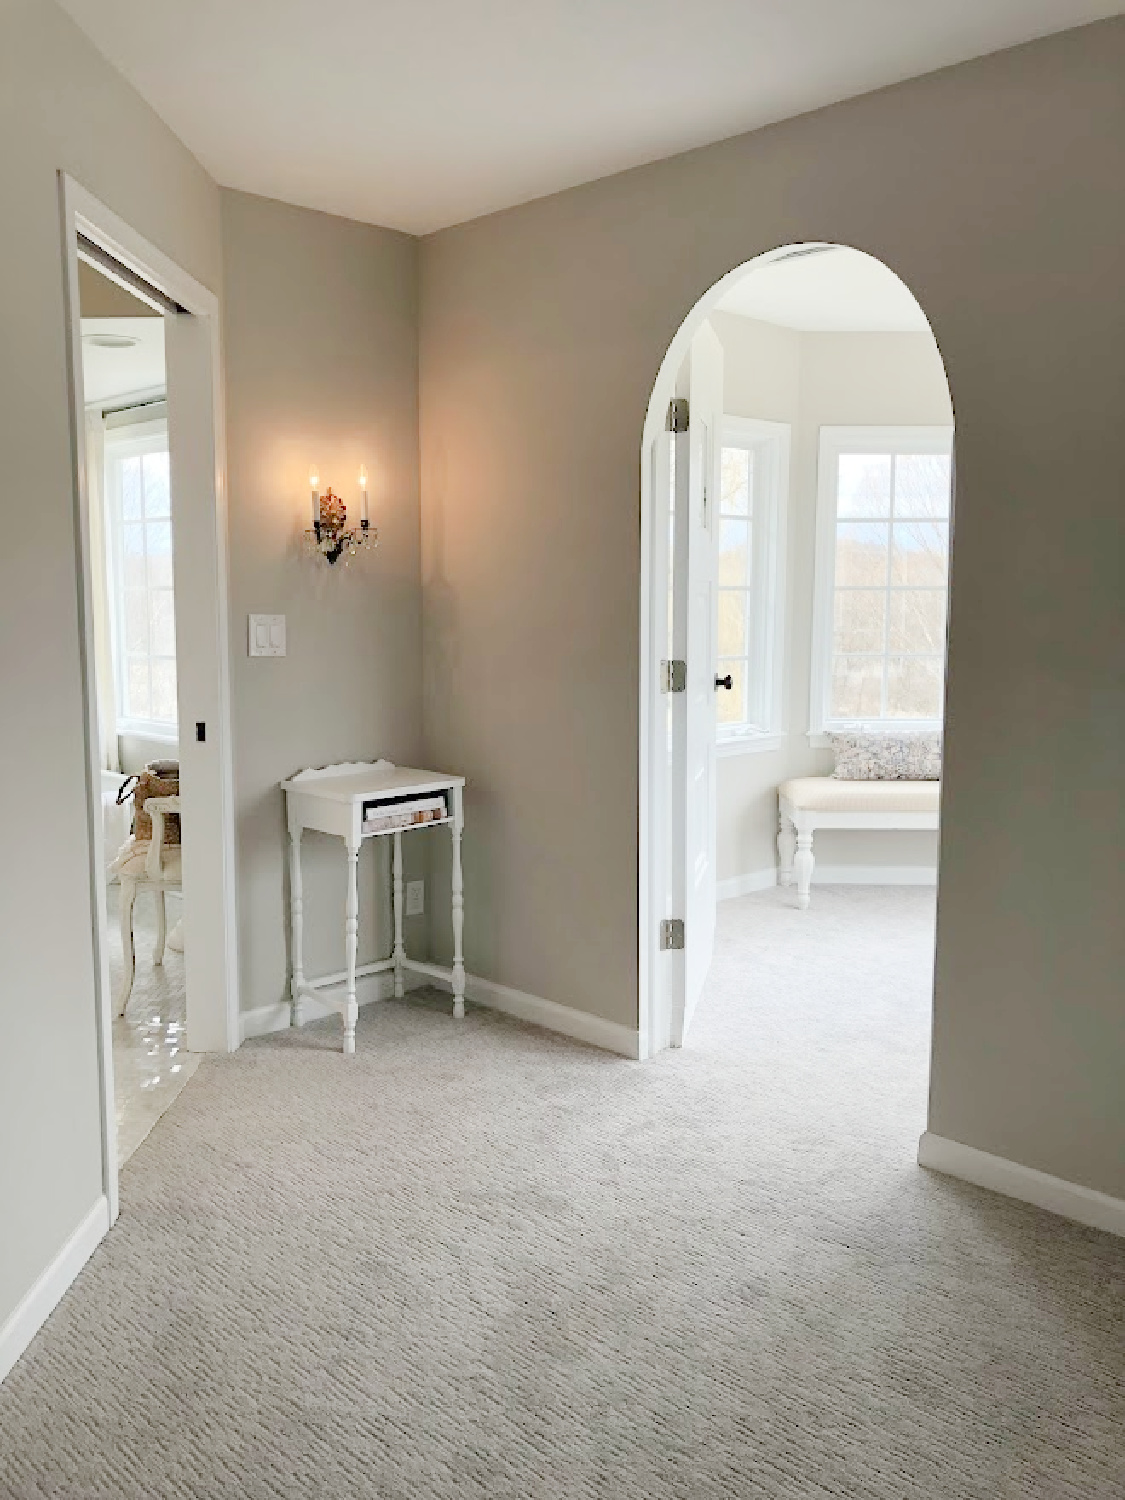 Pocket door to bath, antique wall sconce, and arched doorway to turret sitting room in coastal bedroom remodel (SW Agreeable Gray on walls) at the Georgian - Hello Lovely Studio. #agreeablegray #swagreeablegray